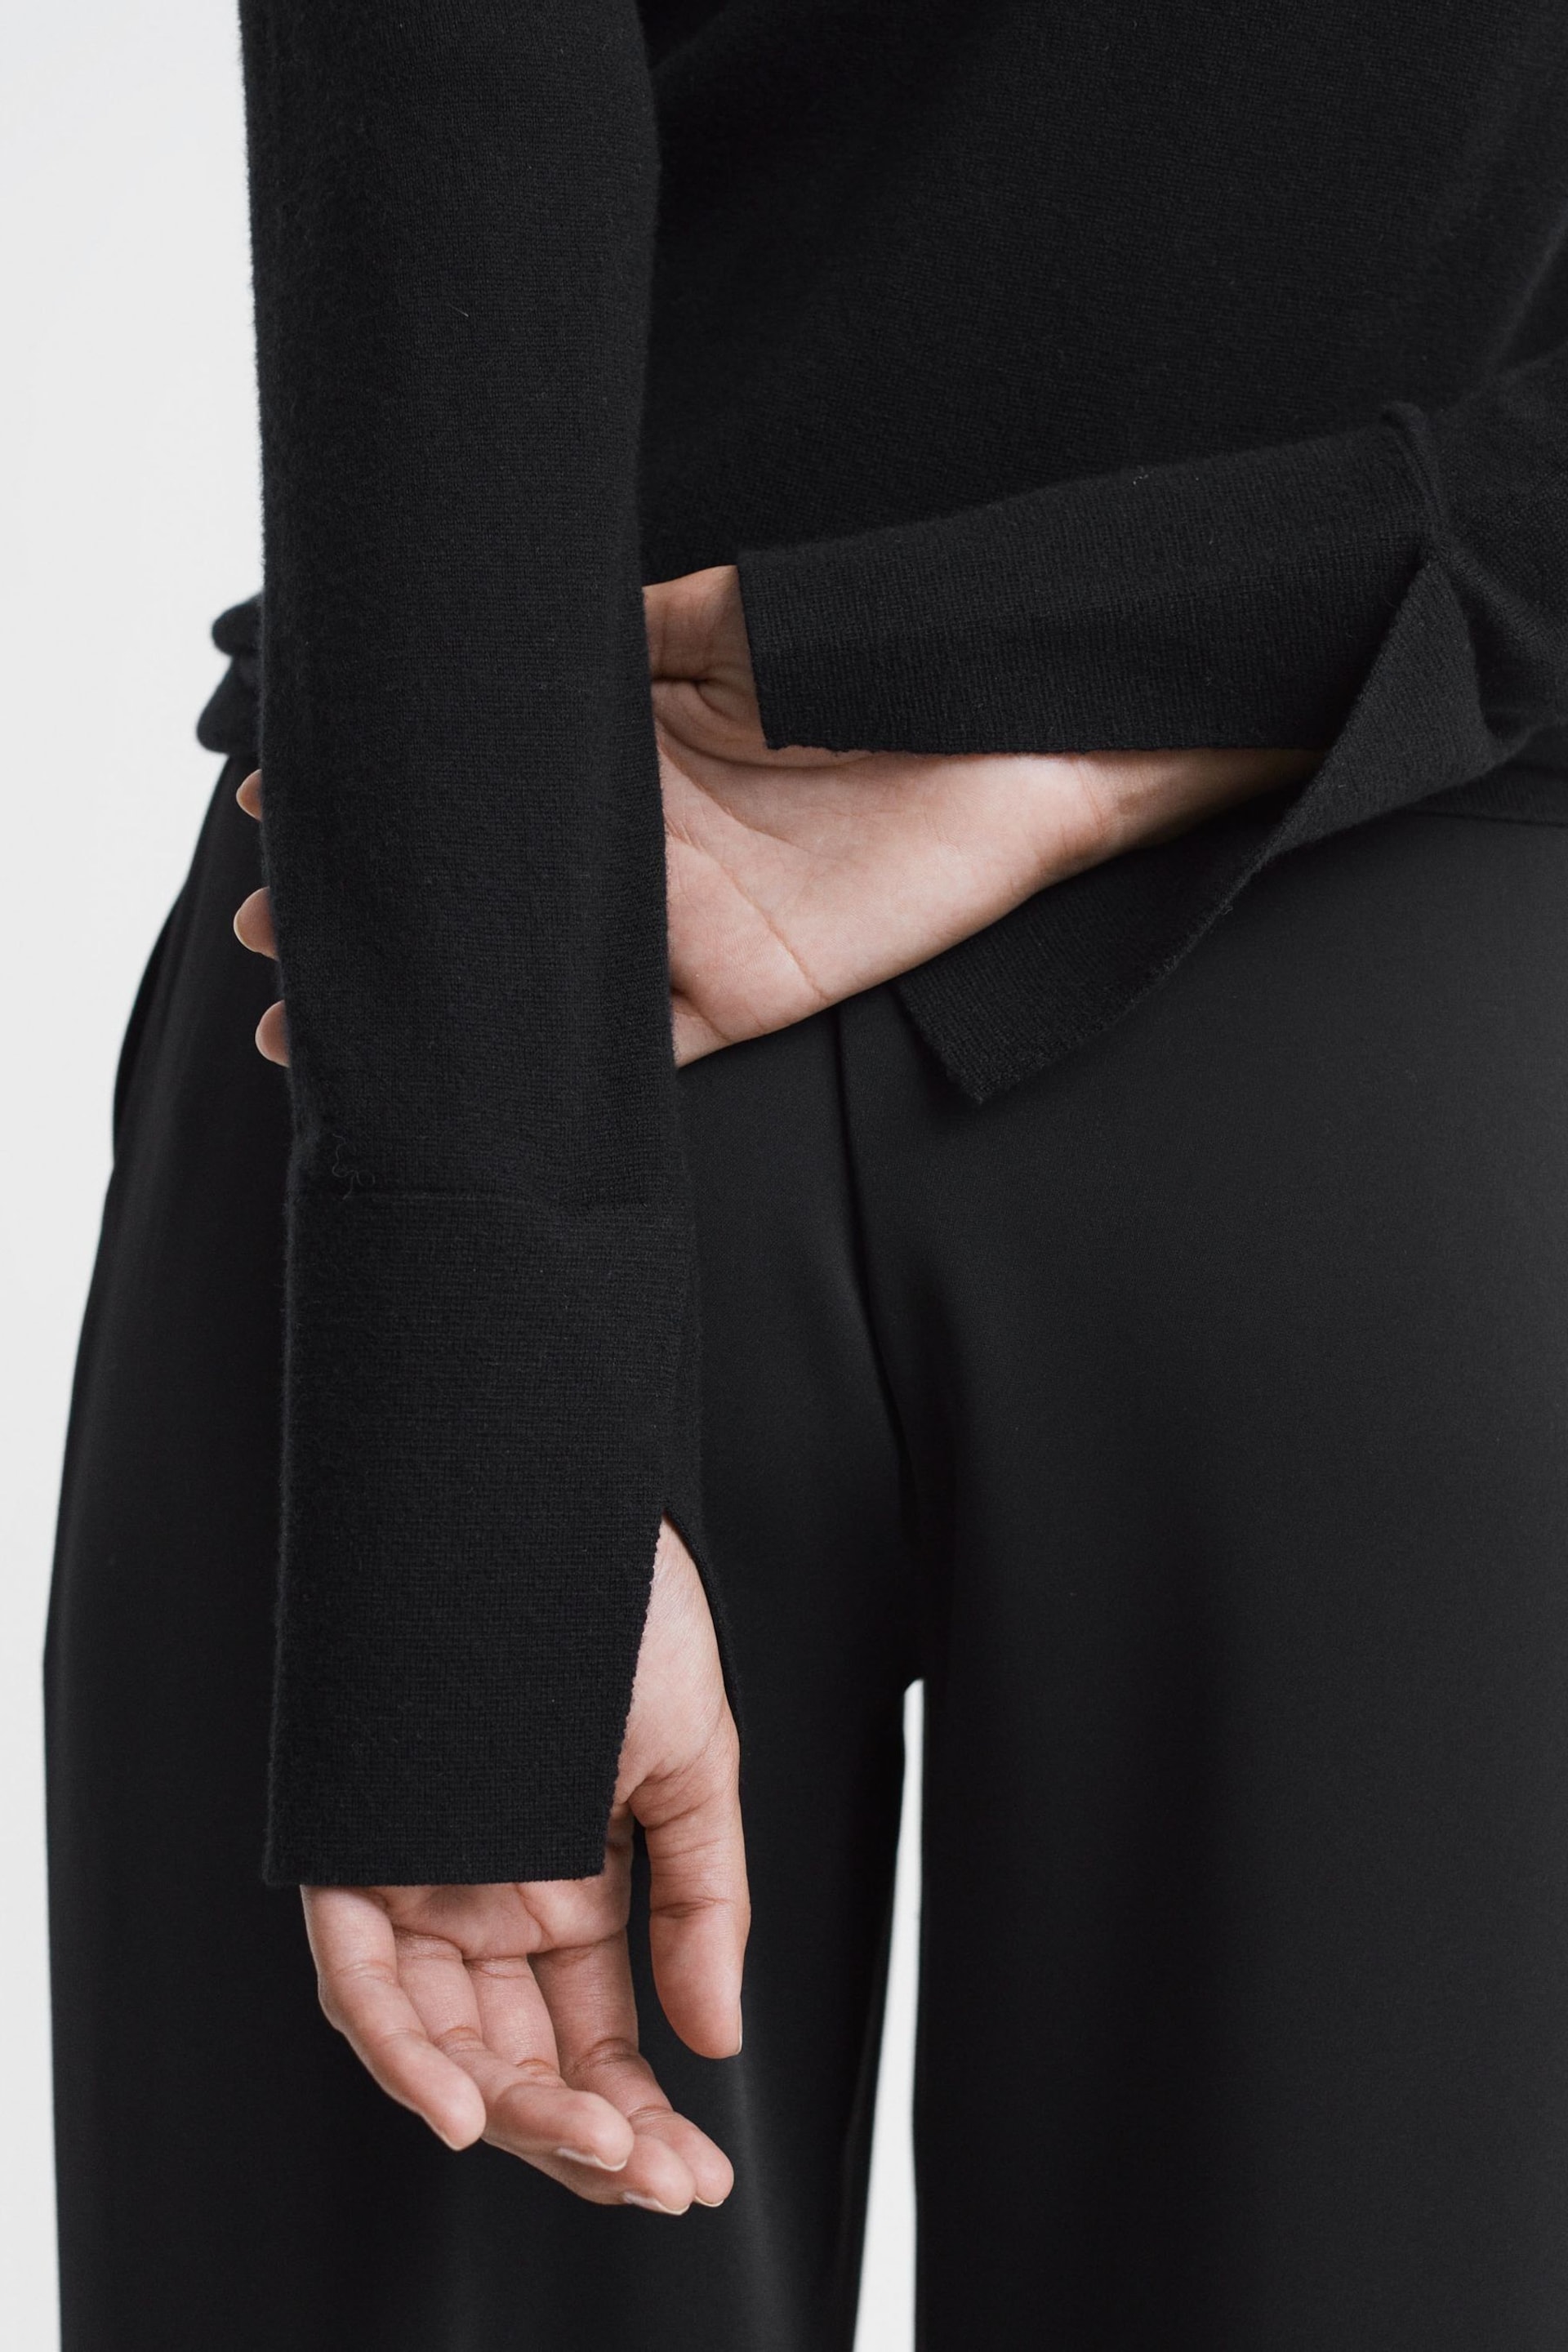 Reiss Black Kylie Merino Wool Fitted Funnel Neck Top - Image 4 of 5